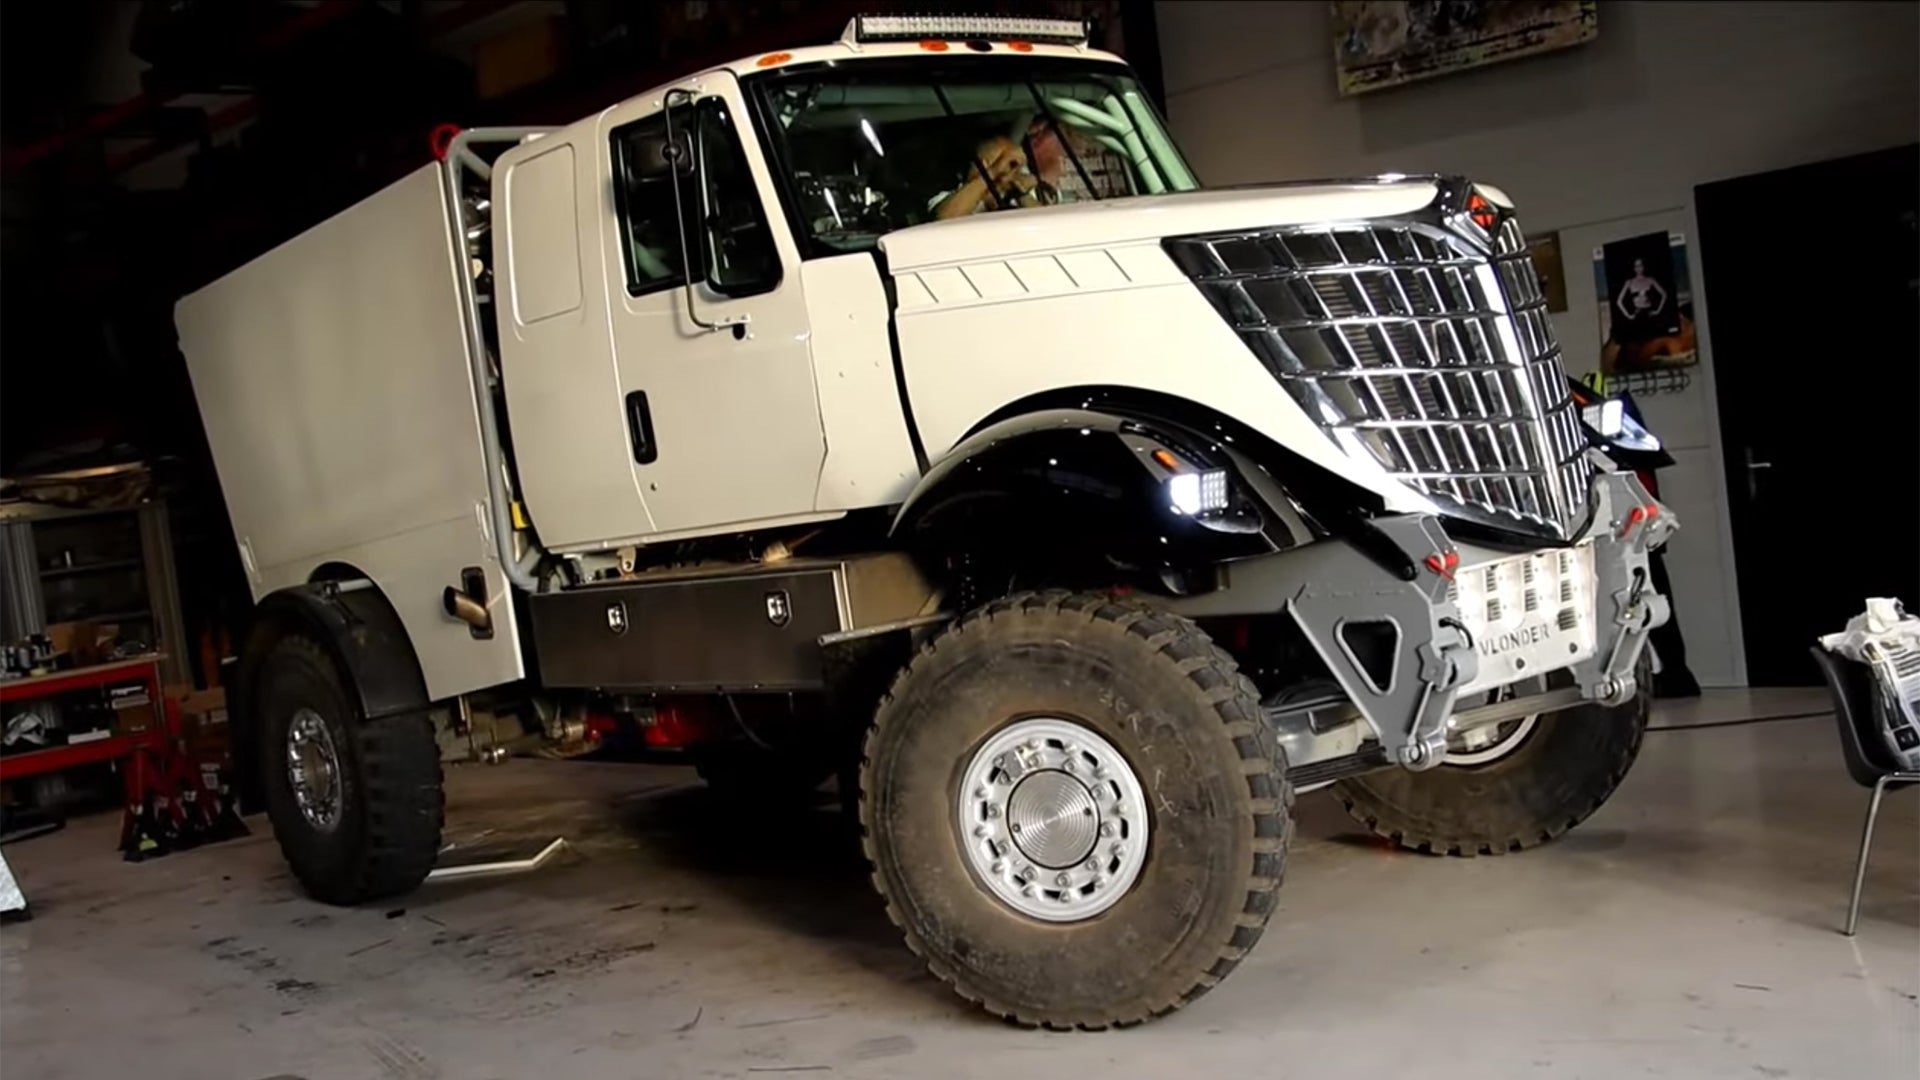 This 1,100-HP Off-Road Semi Truck Is Perfect for Minor Errands